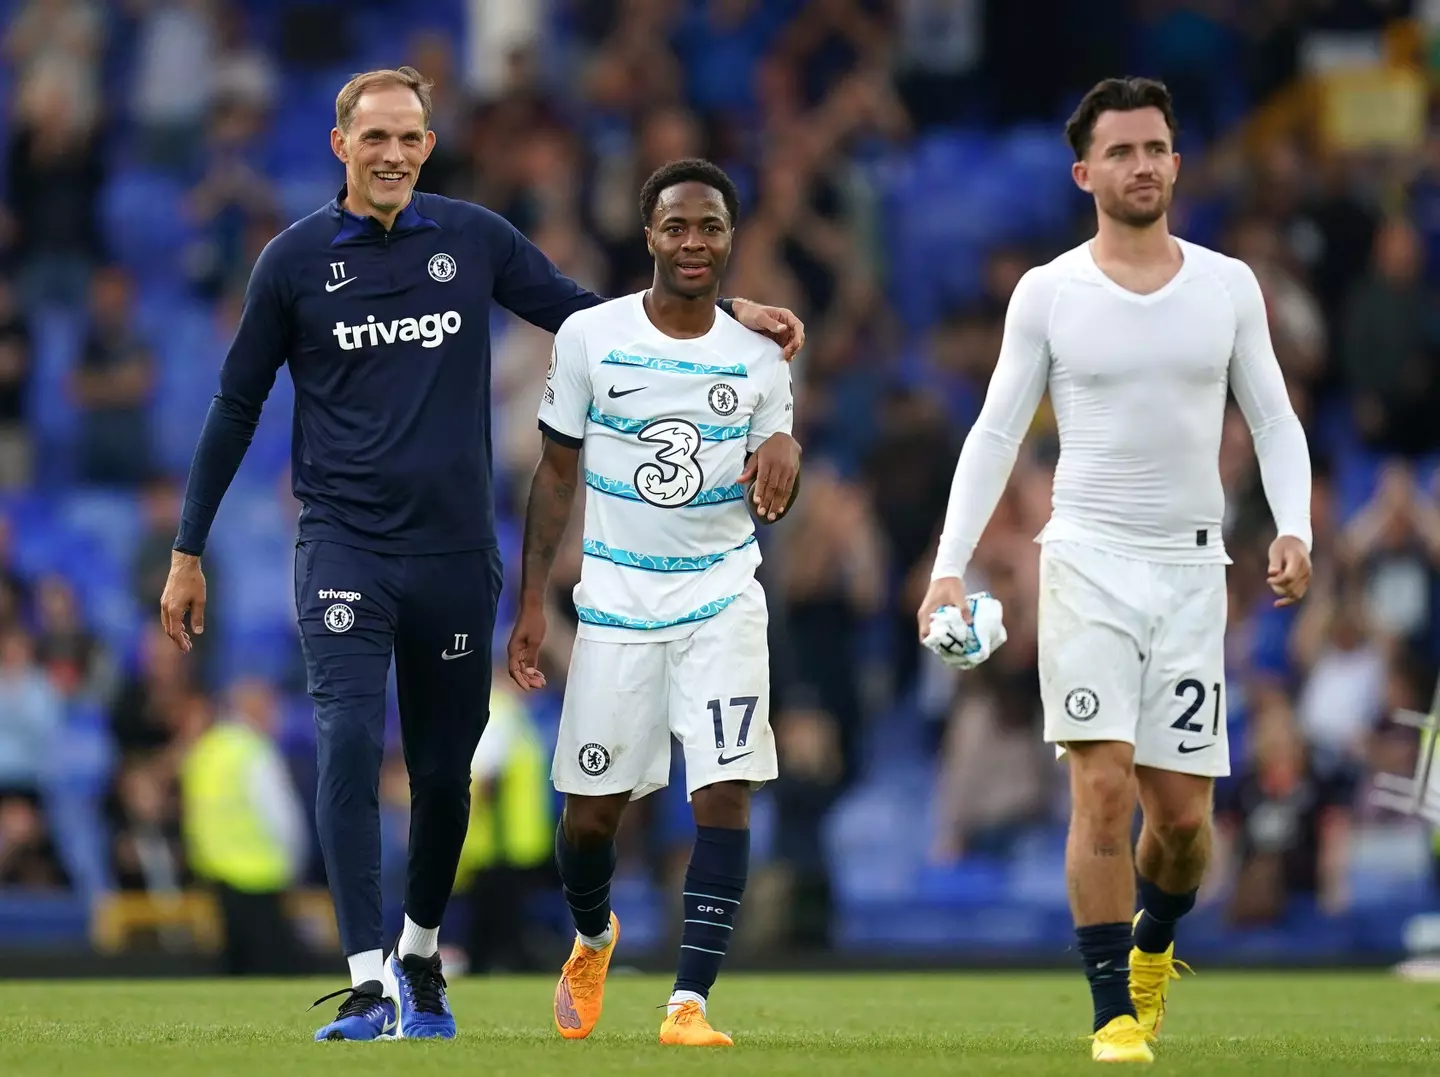 Chelsea manager Thomas Tuchel greets Chelsea's Raheem Sterling following the Premier League match at Goodison Park, Liverpool. (Alamy)